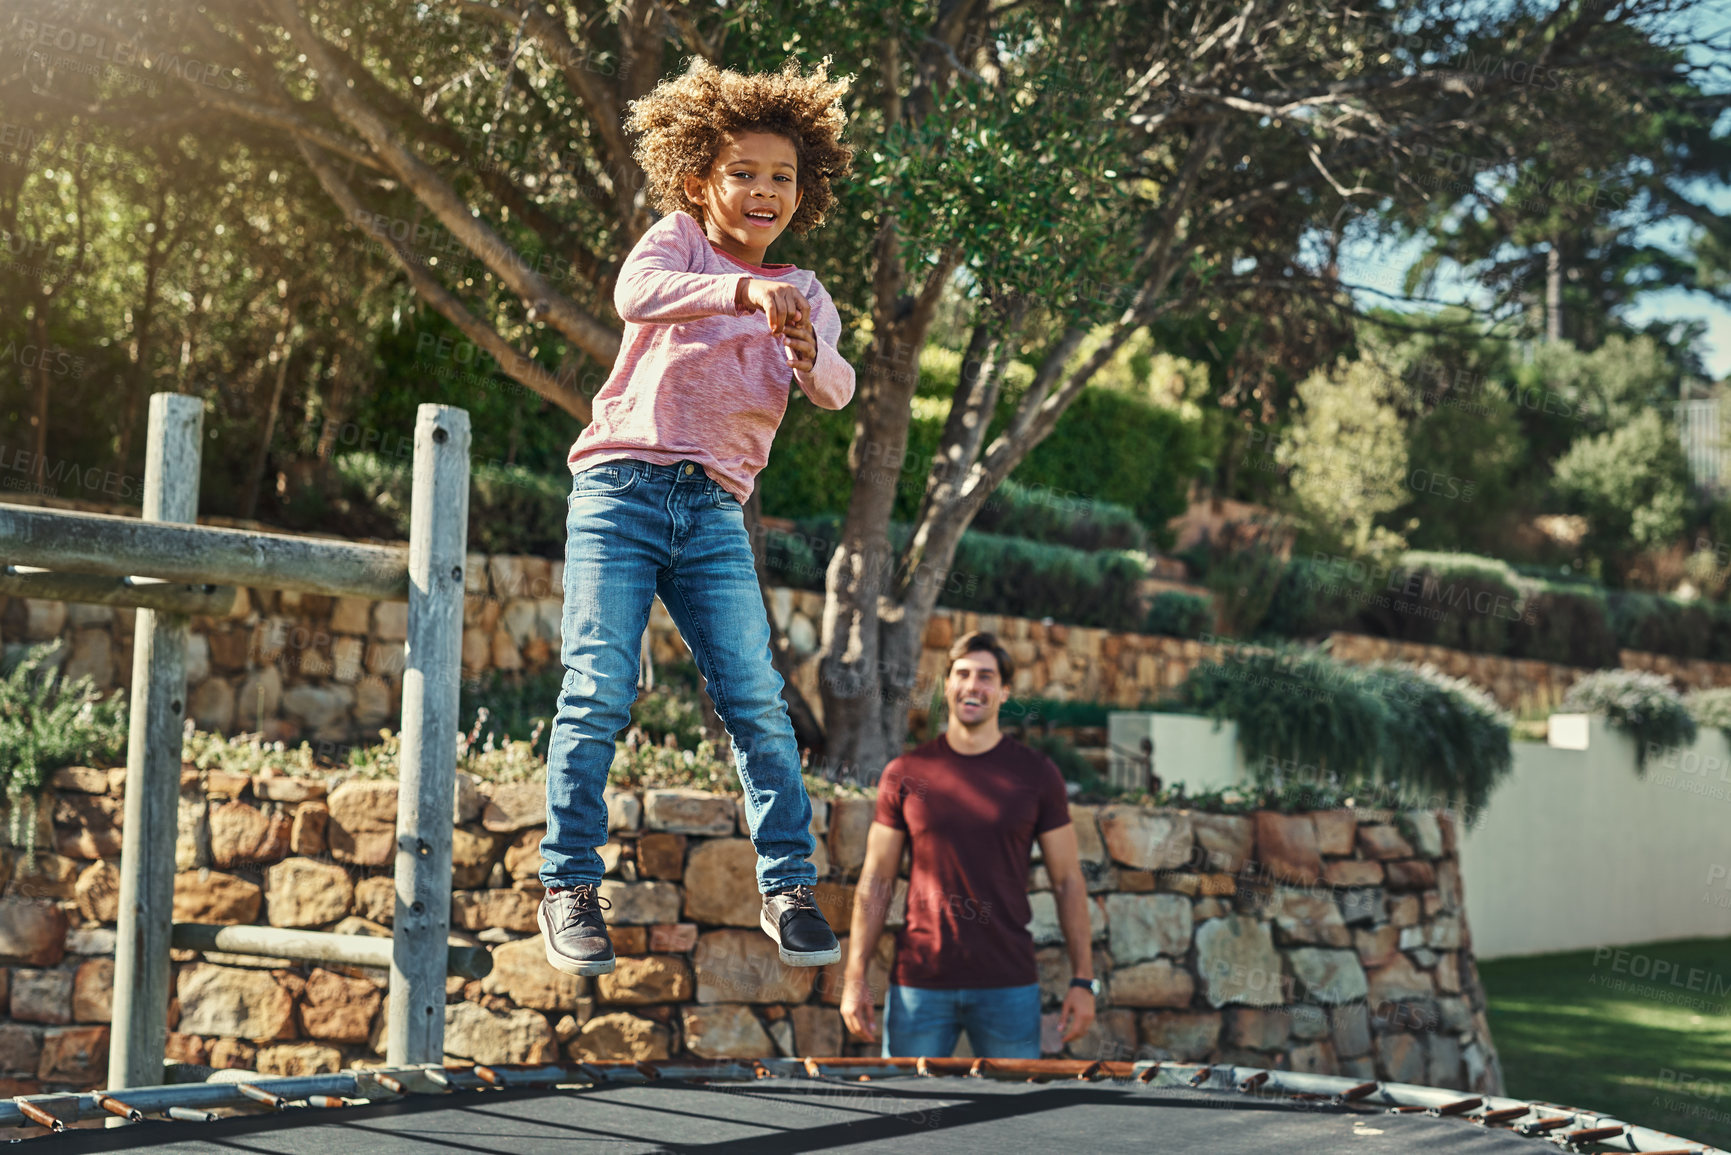 Buy stock photo Shot of an adorable little boy jumping on a trampoline with his father watching closely in the background